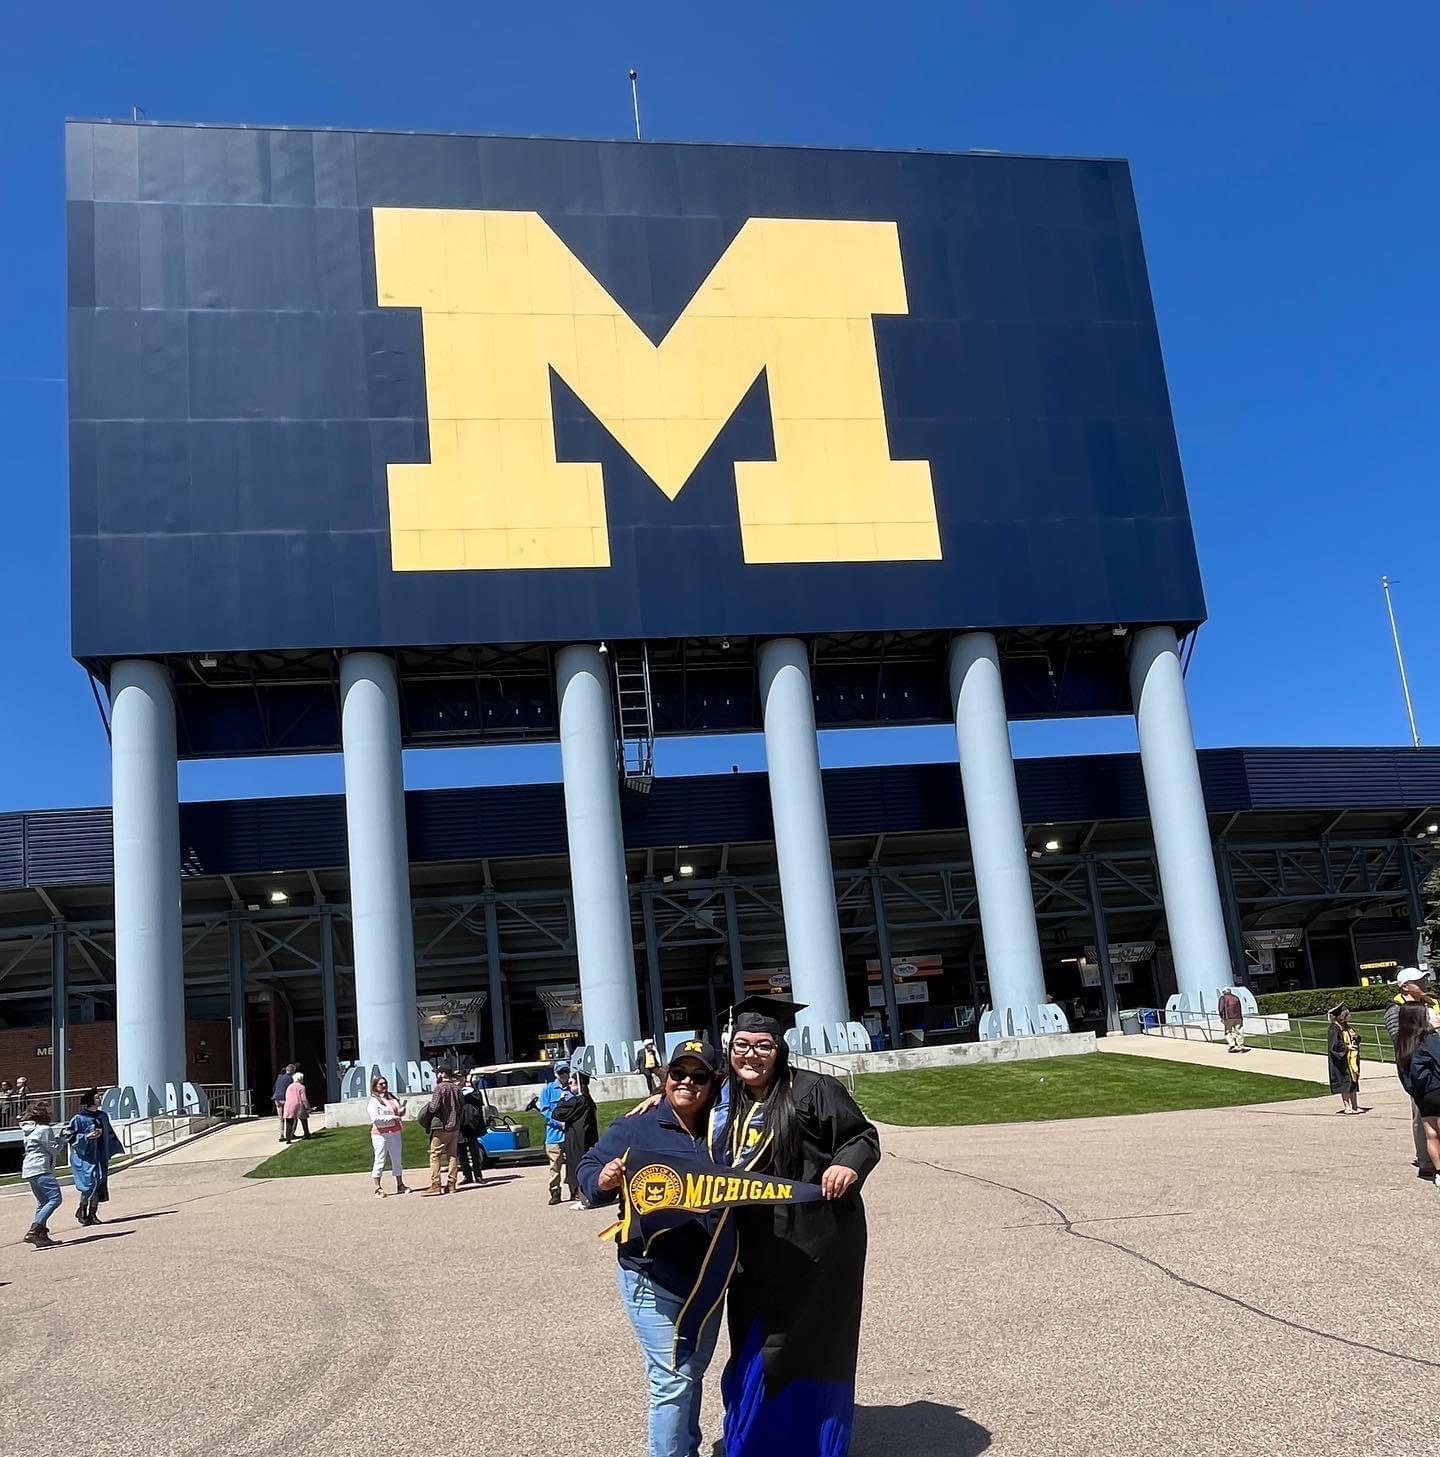 Vanessa Olivares, on the right, pictured with her mother, on the left. The two pose outside of University of Michigan at Vanessa's graduation. Her mother is wearing a University of Michigan hat, sunglasses, and blue jeans. Vanessa wears her graduation grown as both her and her mother hold University of Michigan banner flag.